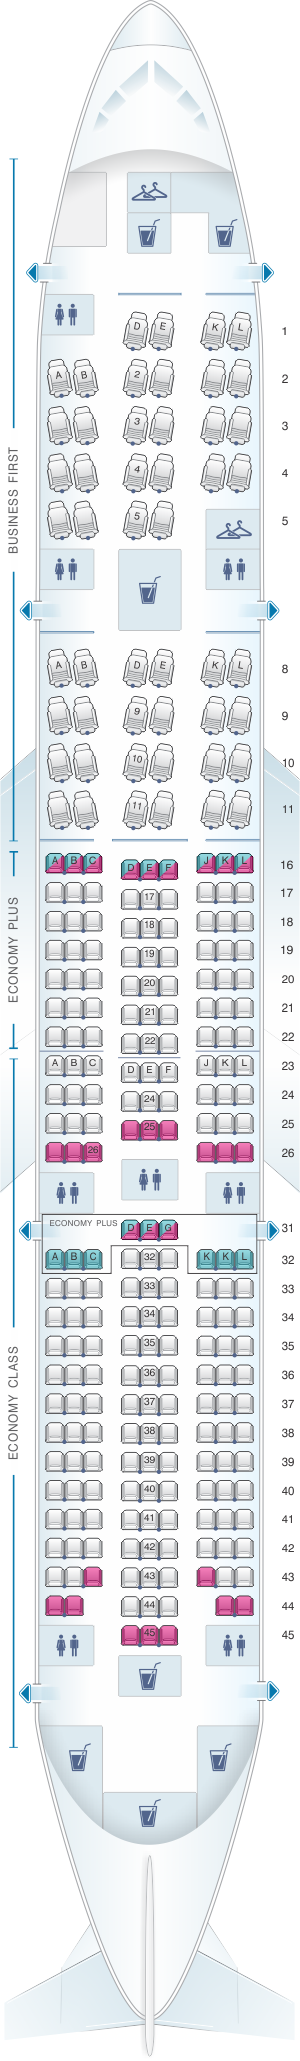 Boeing 777 222a Seating Chart